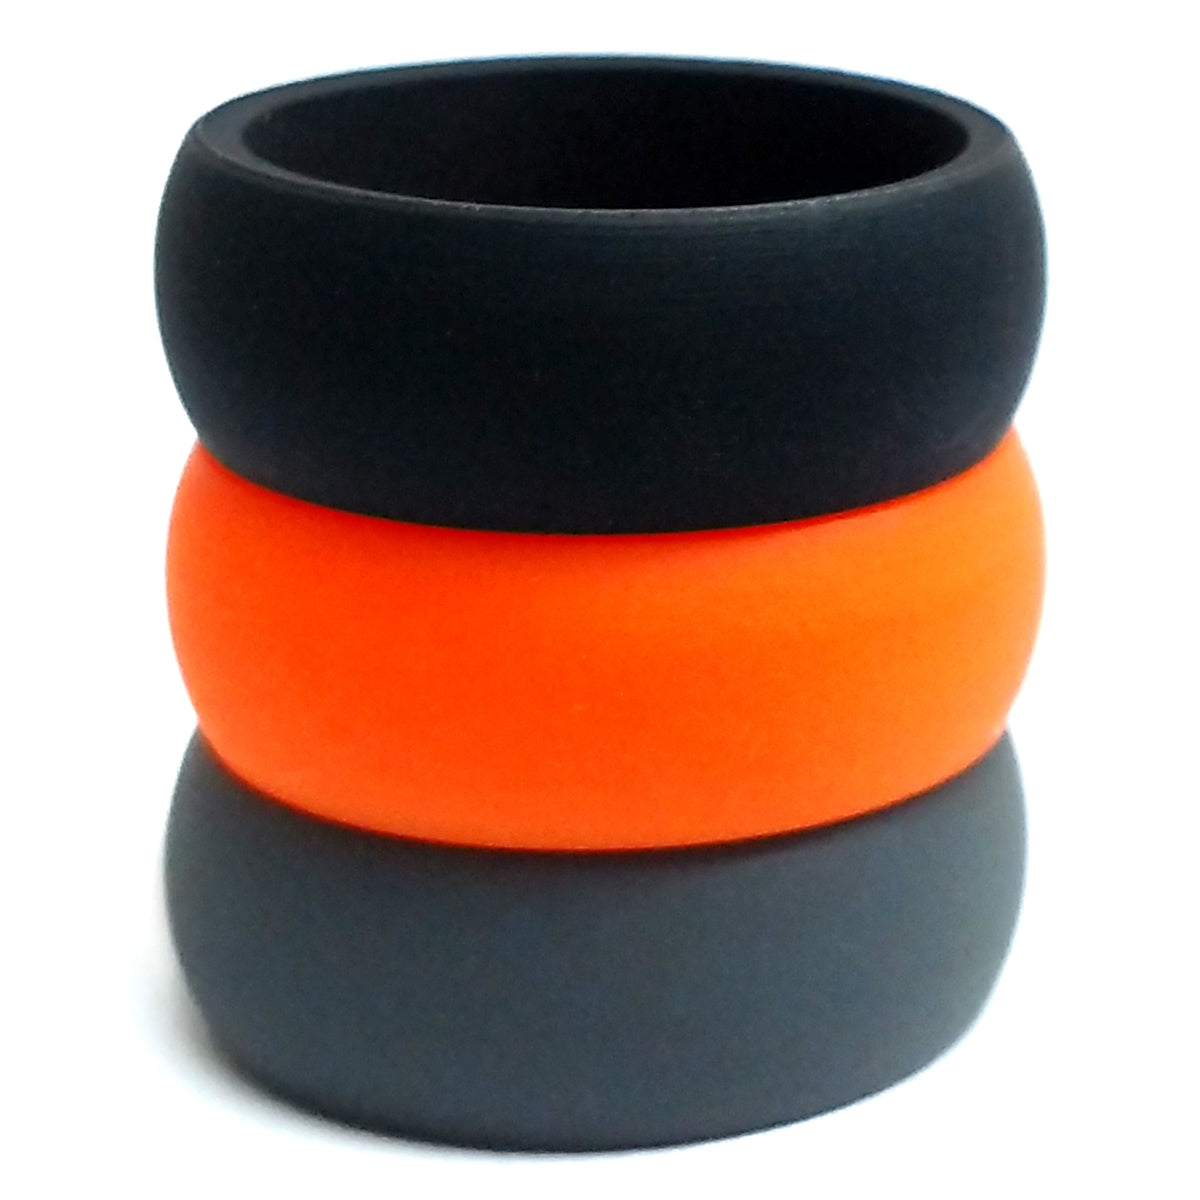 If you need a safe ring to wear to work, gym, or you just want another option to your traditional metal ring, this Silicone Ring by AKTYVUS™ is an excellent choice. Don't sacrifice your style and comfort just because you do not feel comfortable wearing your regular band all the time. QTY - 3 - black, orange, grey.